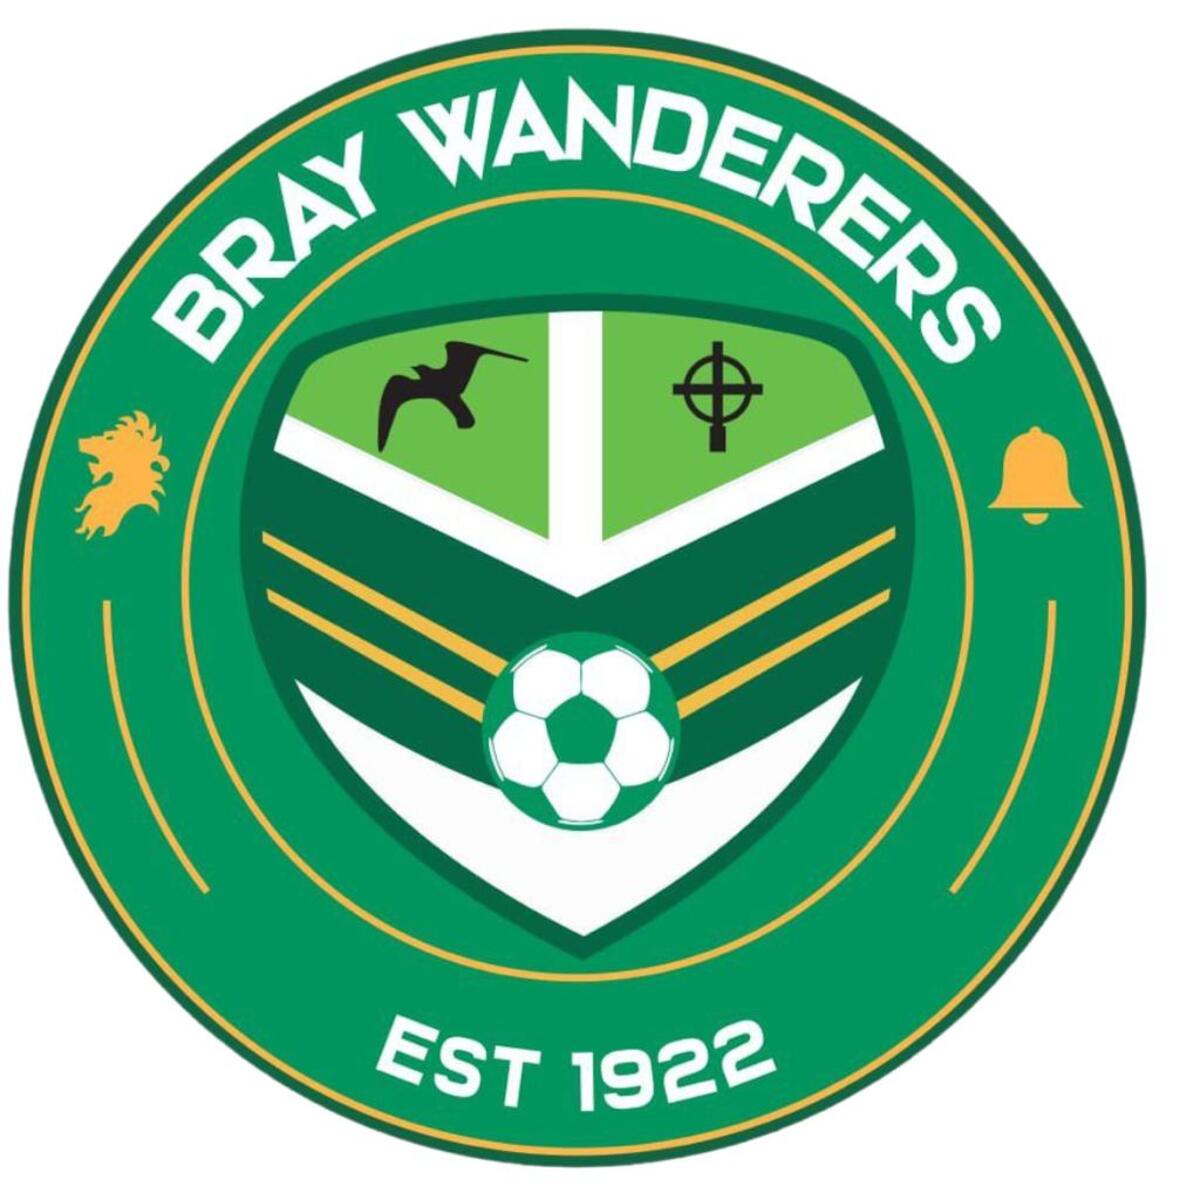 bray-wanderers-afc-25-football-club-facts